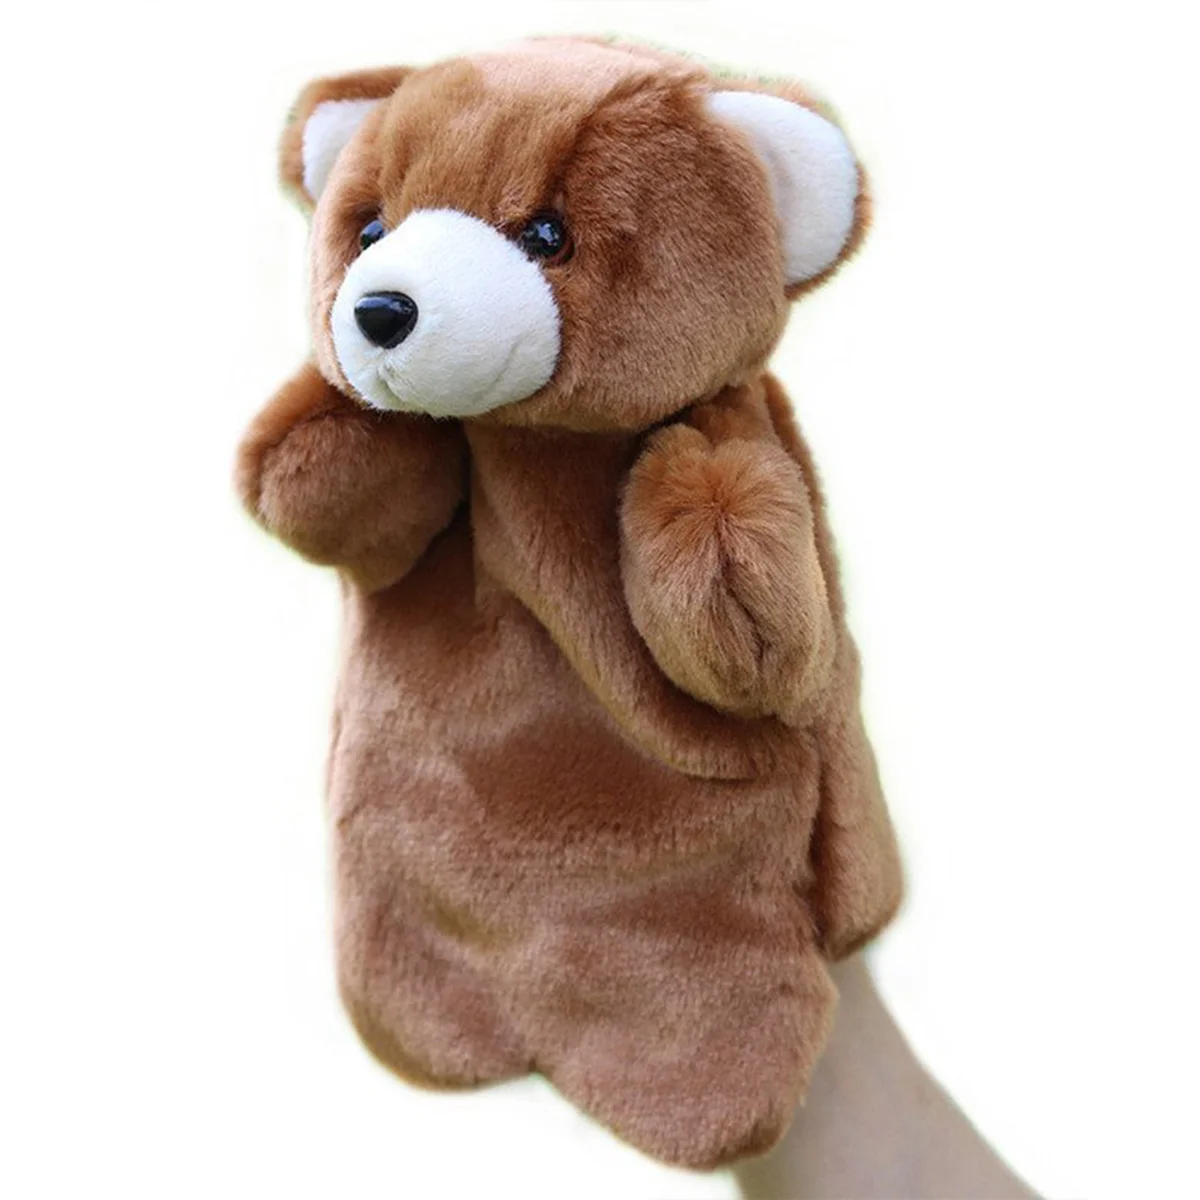 

Hand Puppets Puppet Beardolls Plush Kids Toys Animals Animal Finger Toy Toddlersdoll Adults Zoo Cute Toddler Hands Farm Friends